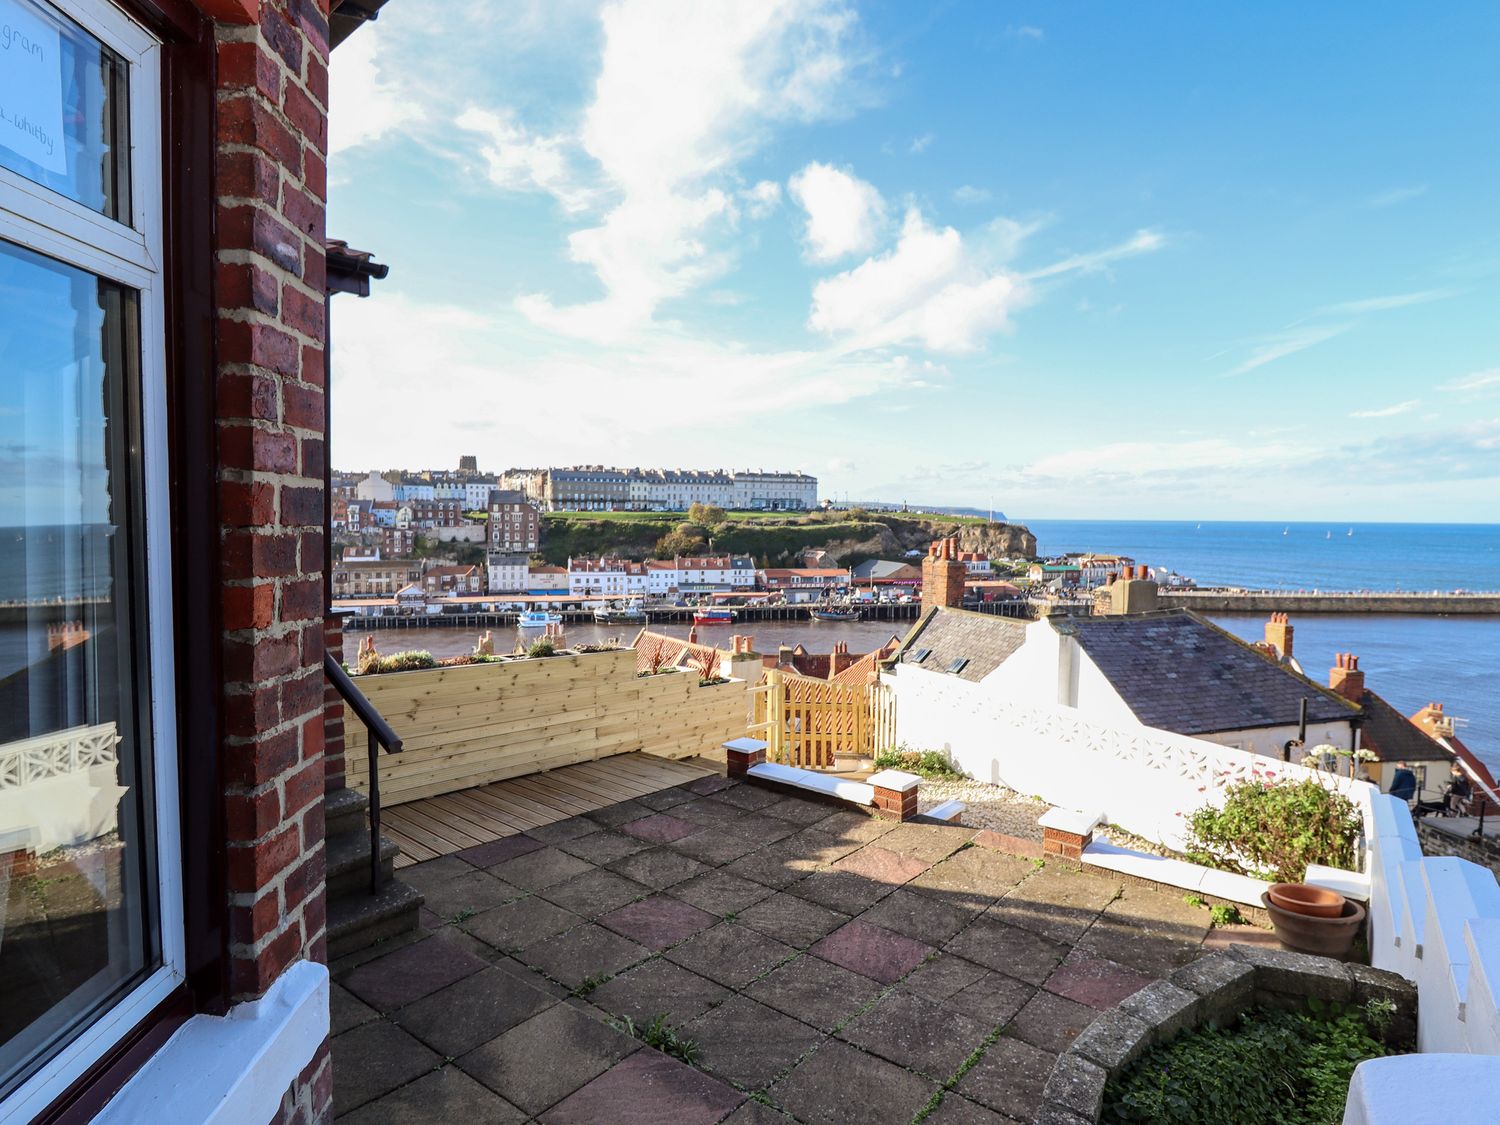 Mariner's View, Whitby